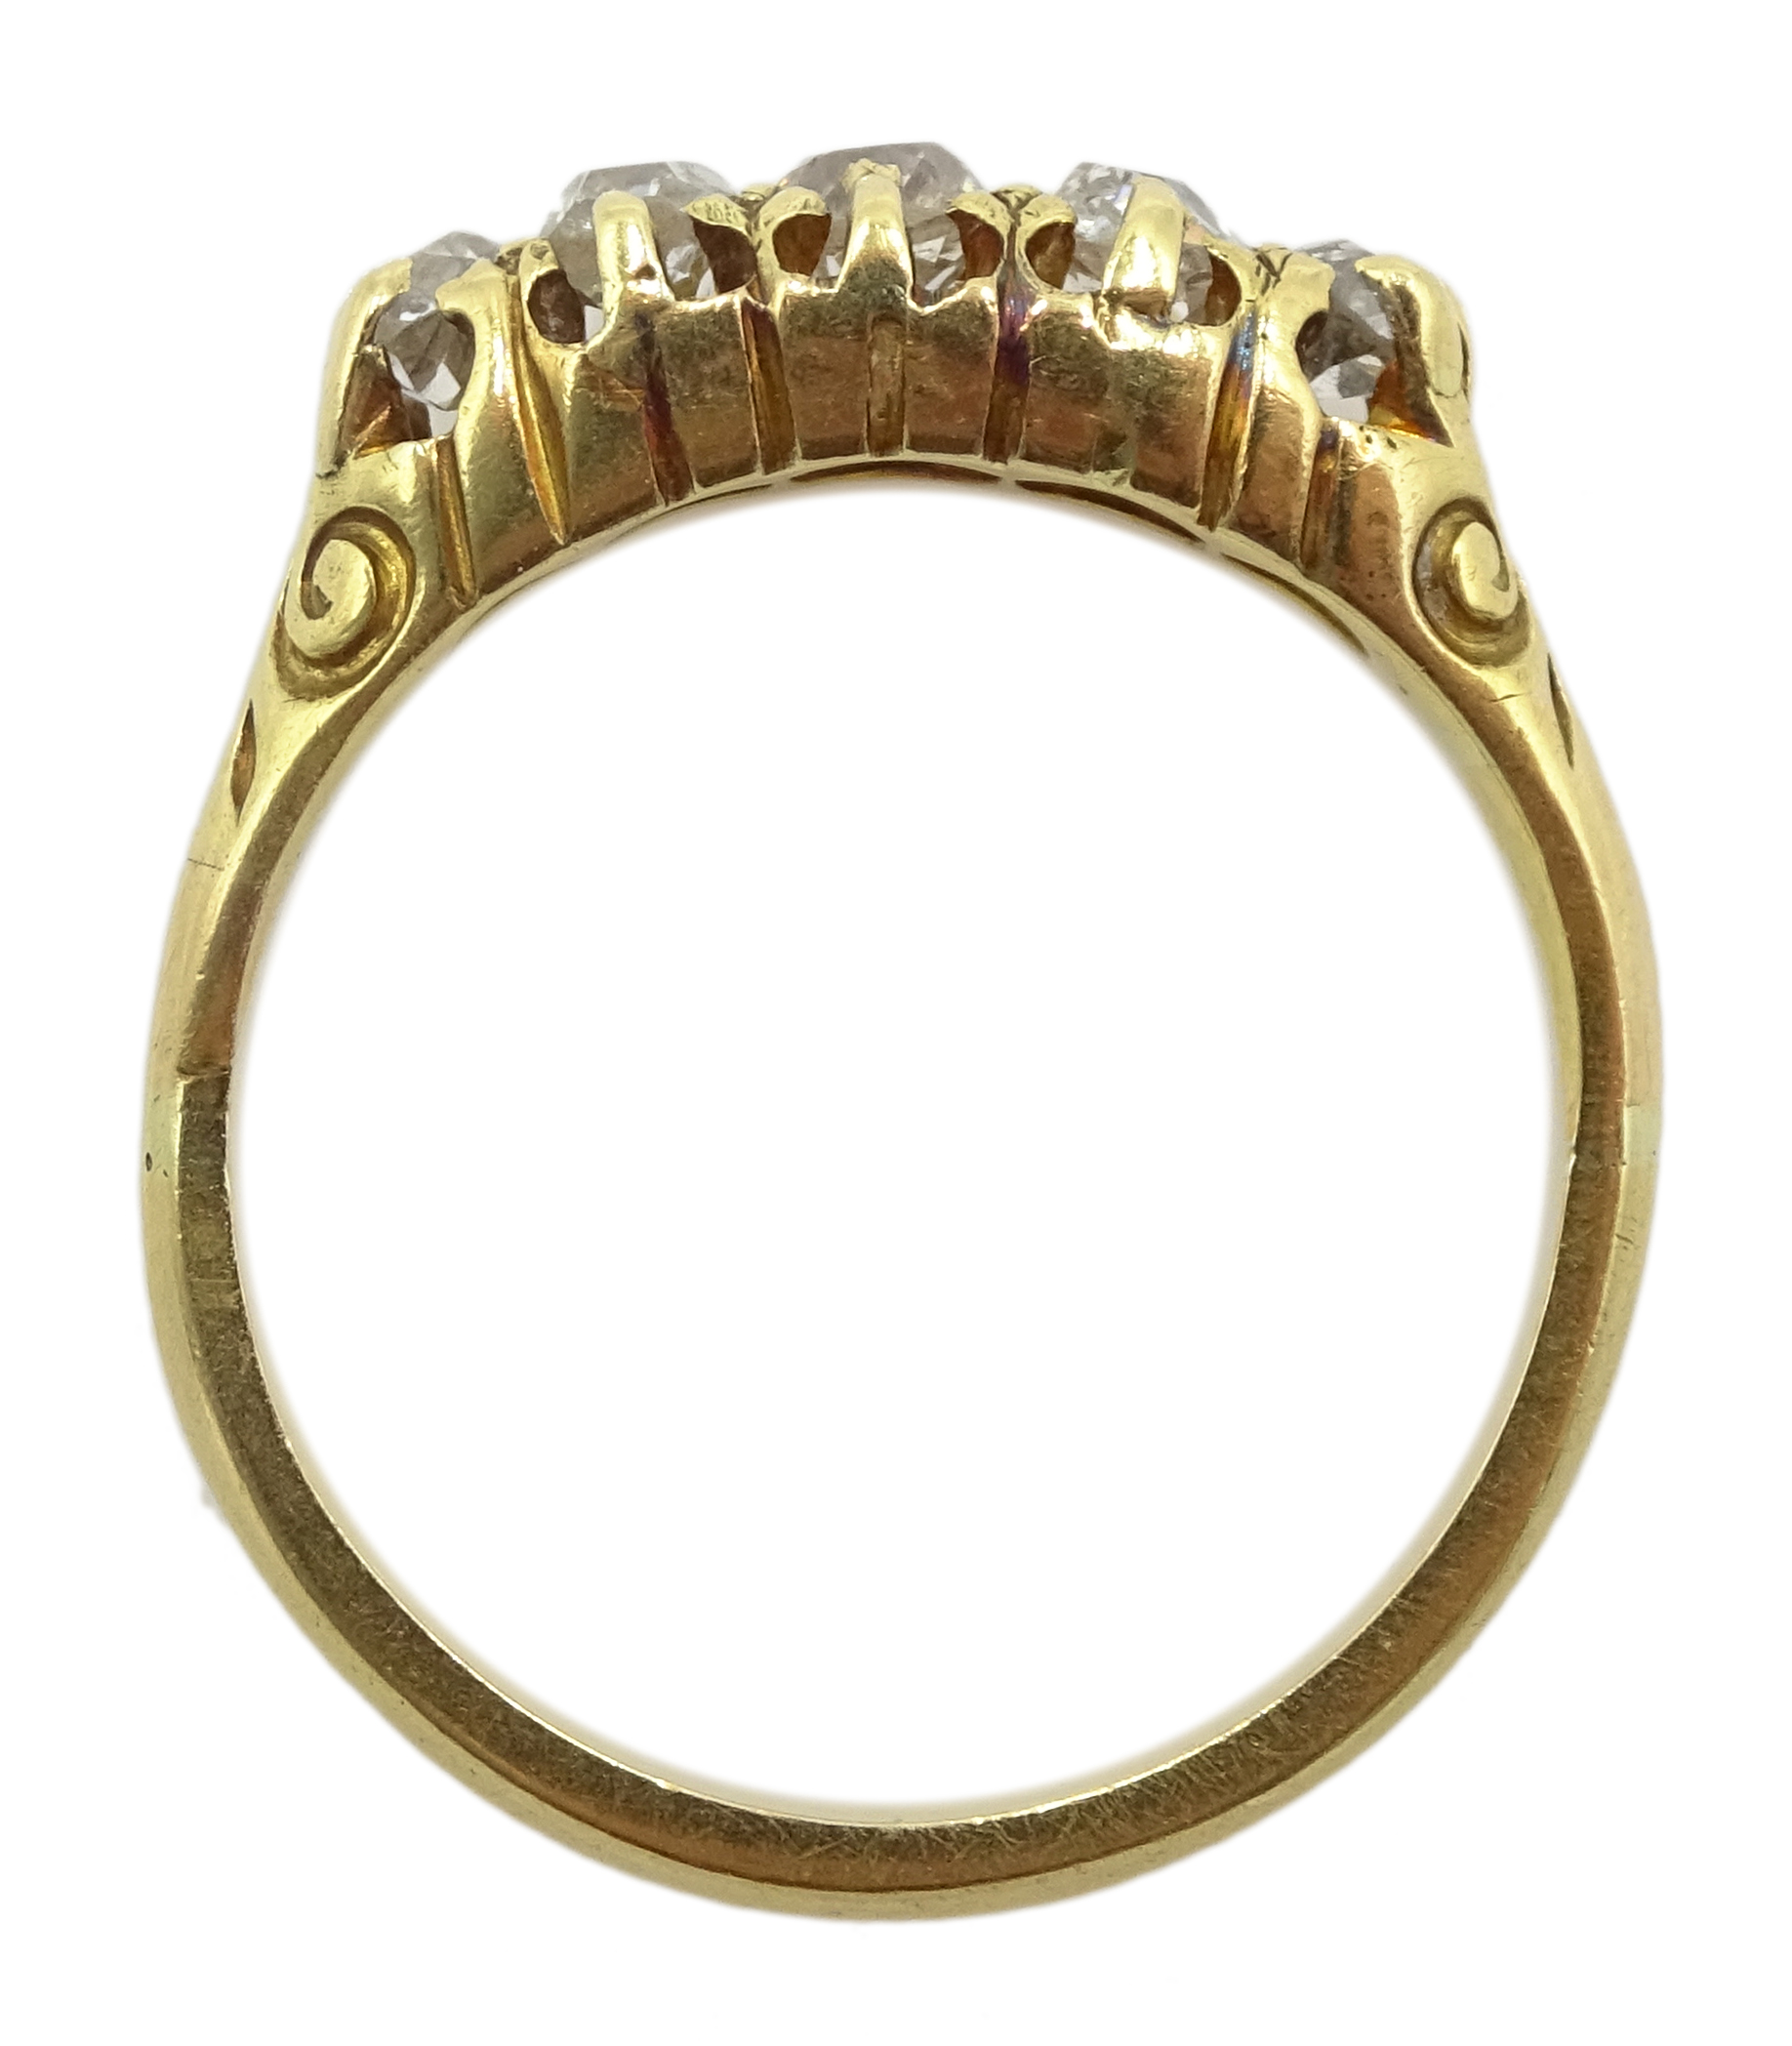 18ct gold five stone old cut diamond ring, total diamond weight approx 0.40 carat - Image 8 of 8